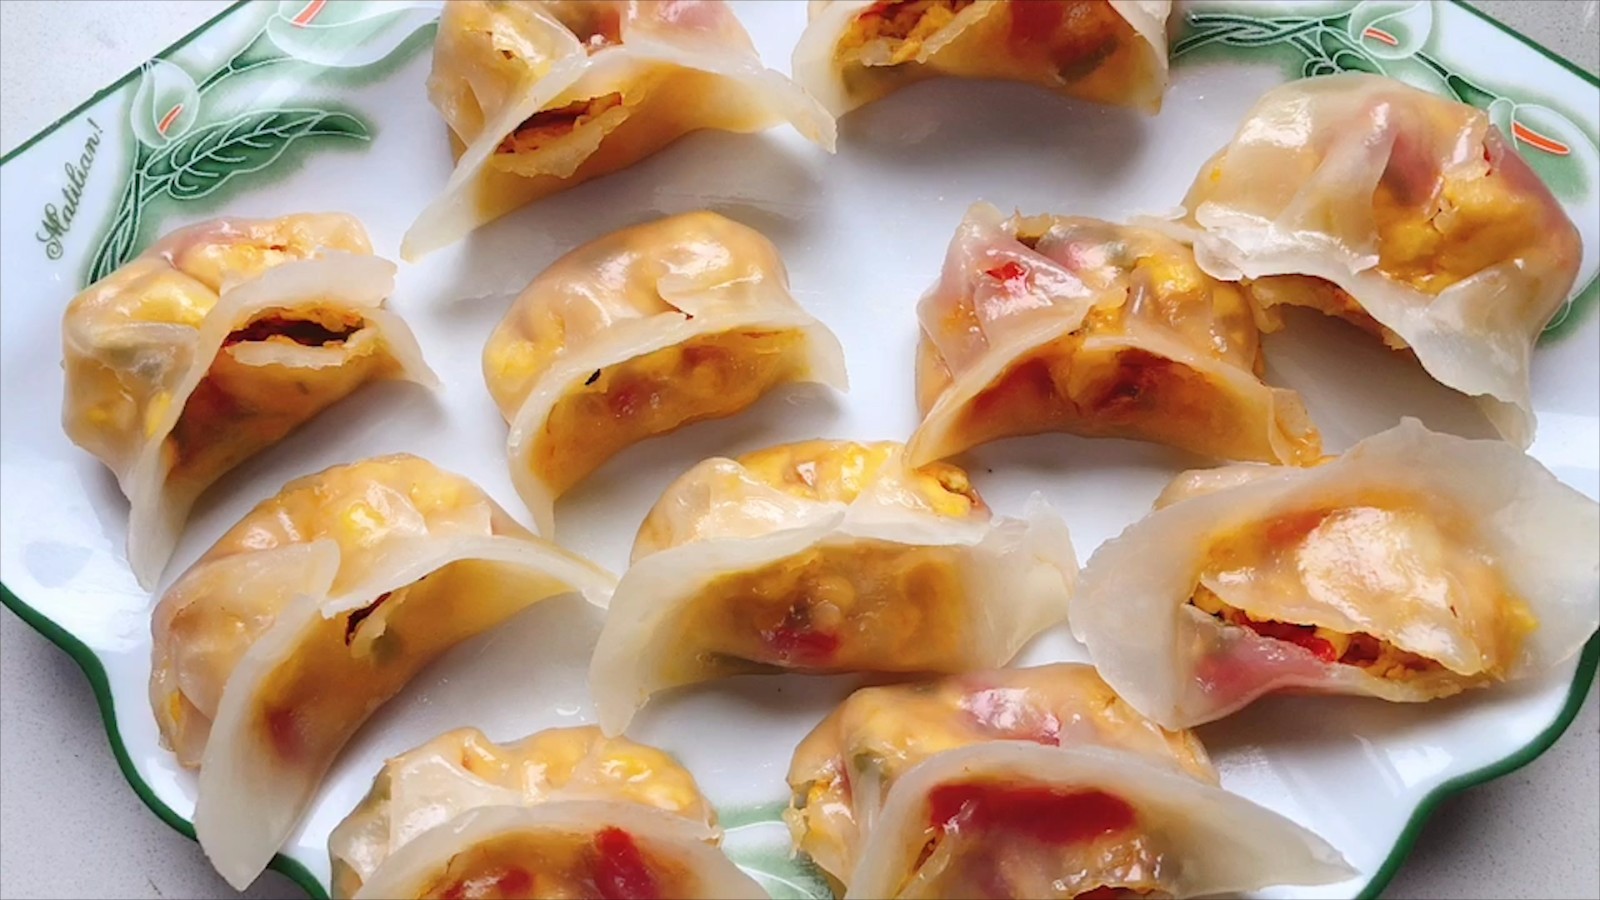 One sister teaches you how to make crystal dumplings, which are simple, beautiful and delicious.